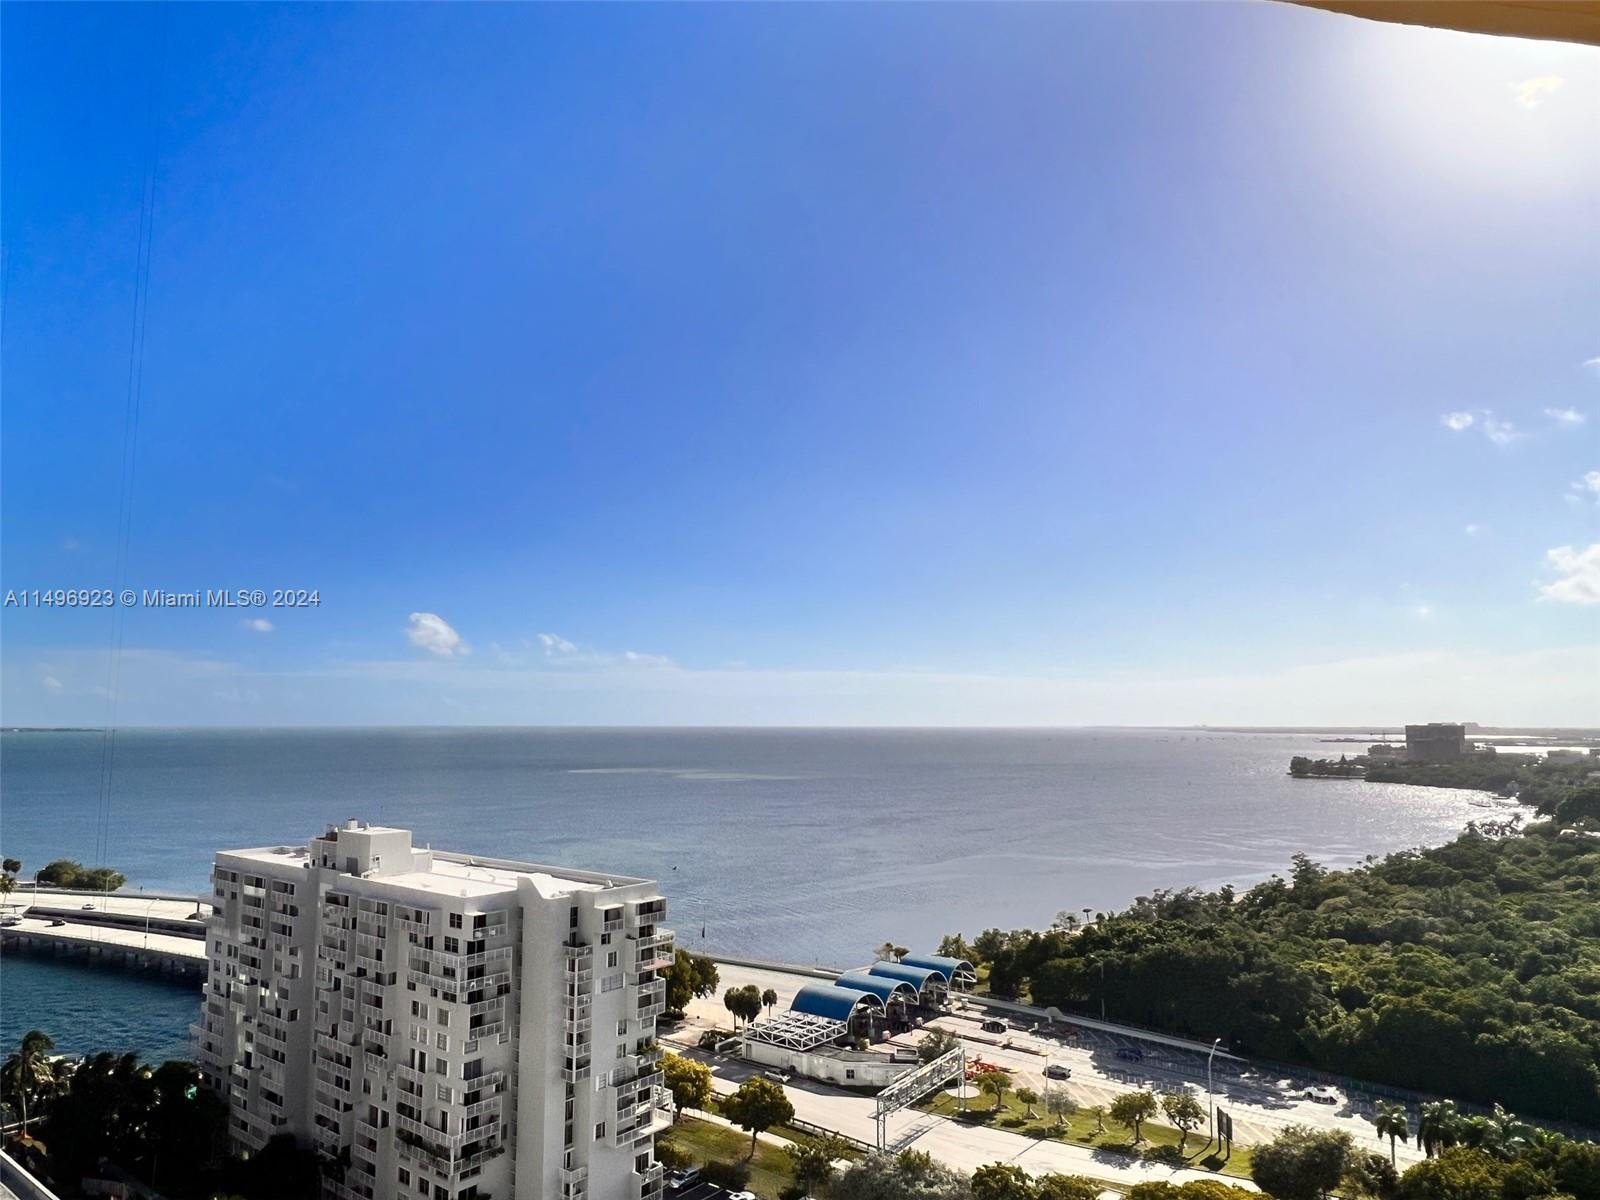 Amazing direct bay views from this rarely available 2Bd / 2 Bthrm SE corner unit with 9' ceilings in living/dinning areas, St Steel Appliances, stackable Washer/Dryer, granite tops and limestone floors. The Metropolitan's ideally located on Brickell Av with immediate access to I95 and the Rickenbacker Cswy and a 2 min drive from Brickell's Financial District. Very well maintained building with amazing amenities including great gym, pool, BBQ, tennis, sauna, on-site cafe/sundry shop, media room and large party room. 2 SIDE BY SIDE parking spaces next to elevators & 1 storage bin included. Pets up to 40Lbs ok. Tenant occupied through SEP/14/24.